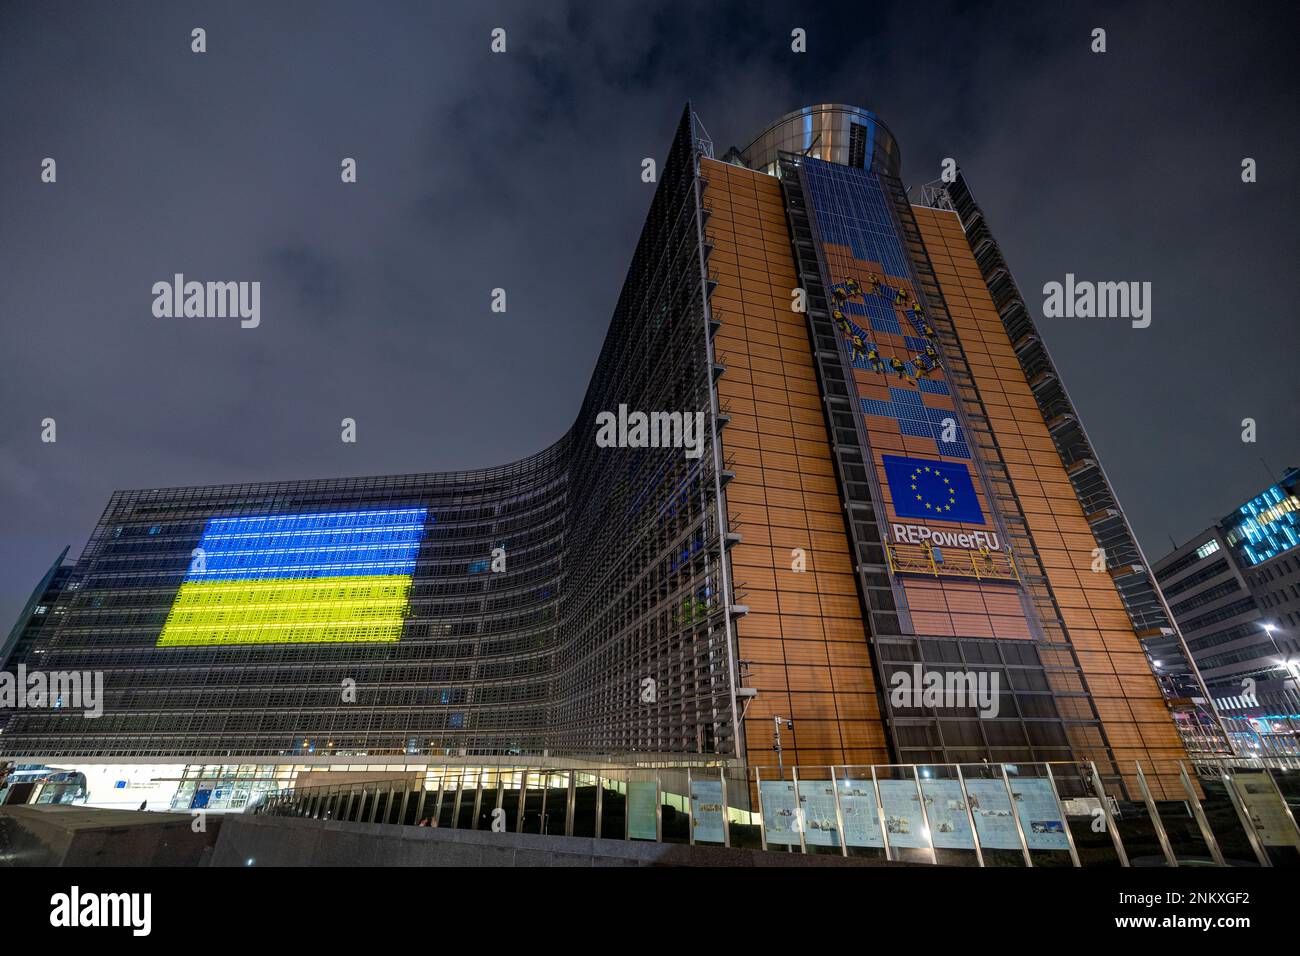 BRUSSELS, Belgium - February 23, 2023: Berlaymont building, seat of the European Commission, with the Ukrainian flag projected on the facade Stock Photo